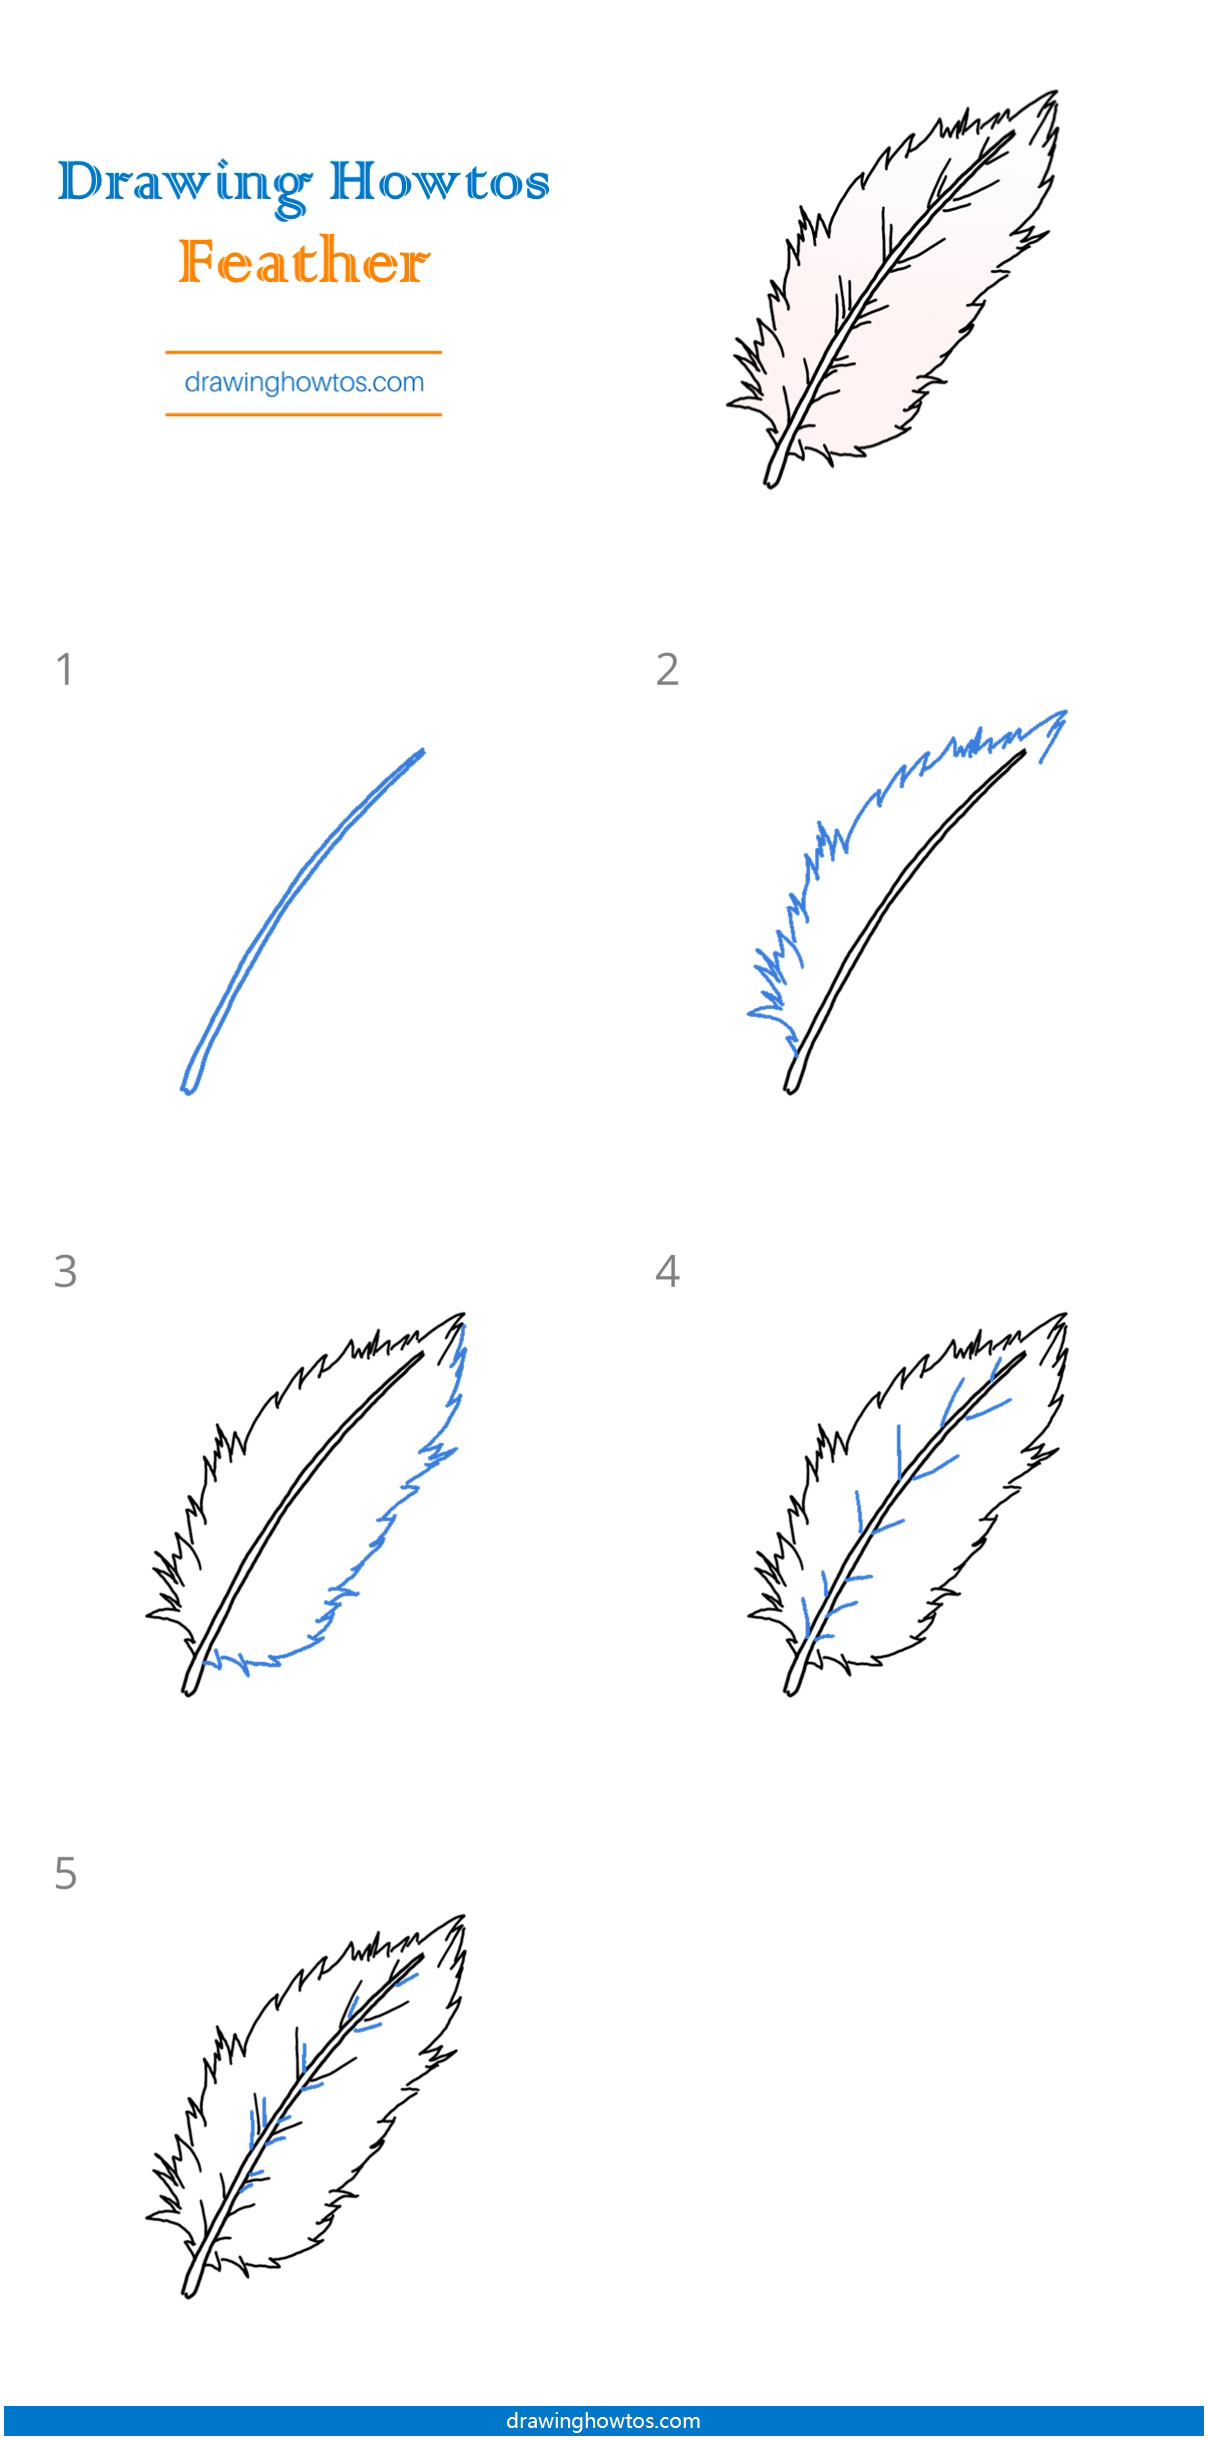 How to Draw a Feather Step by Step